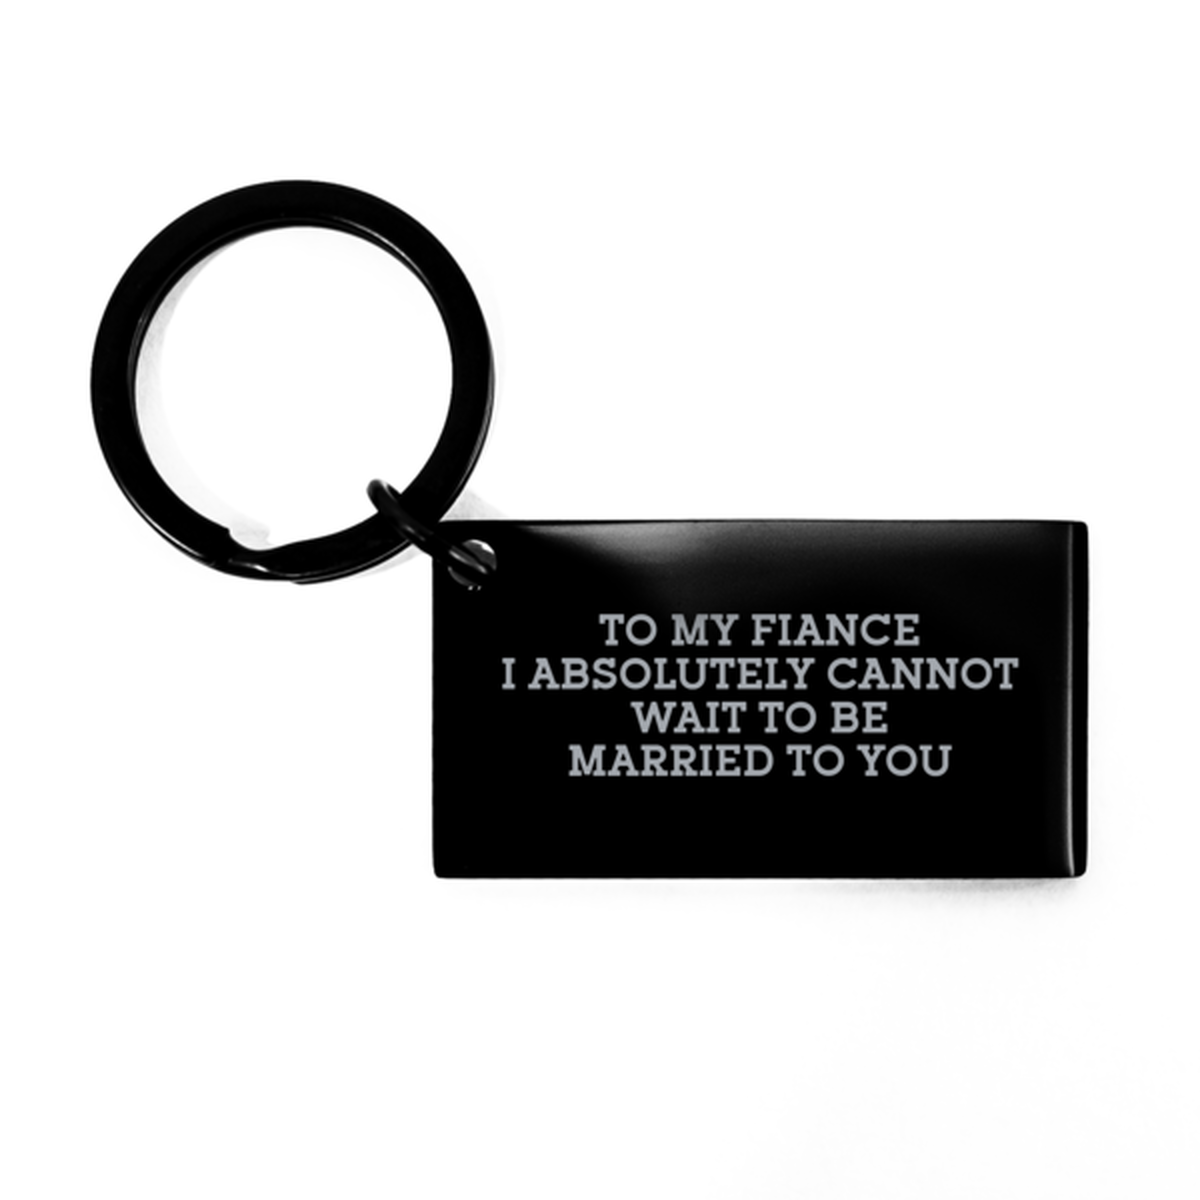 To My Fiance Black Keychain, Cannot Wait To Married To You, Valentines  Gifts For Fiance From Fiancee, Birthday Gifts For Men